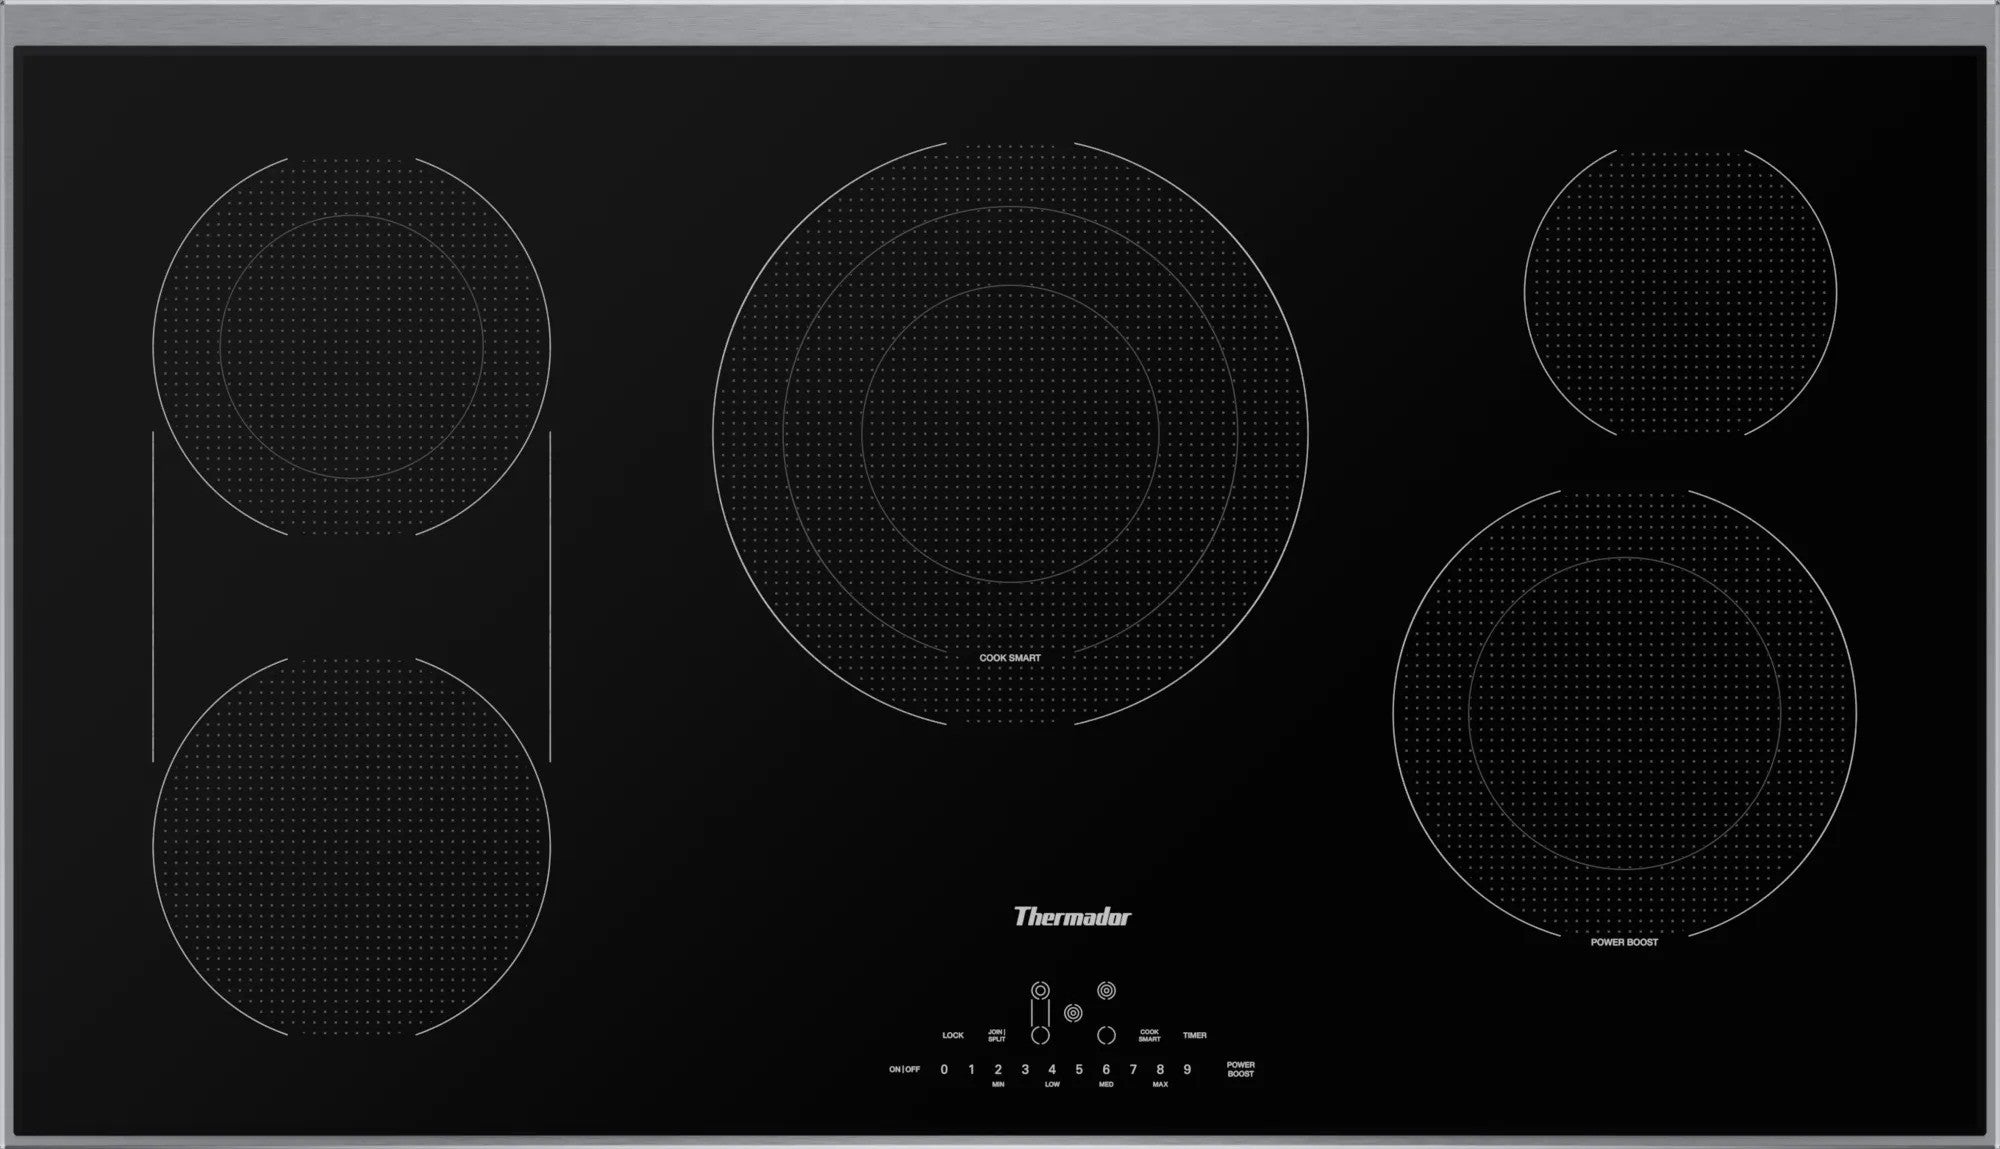 Thermador - 37 Inch Electric Cooktop in Black - CET366YB